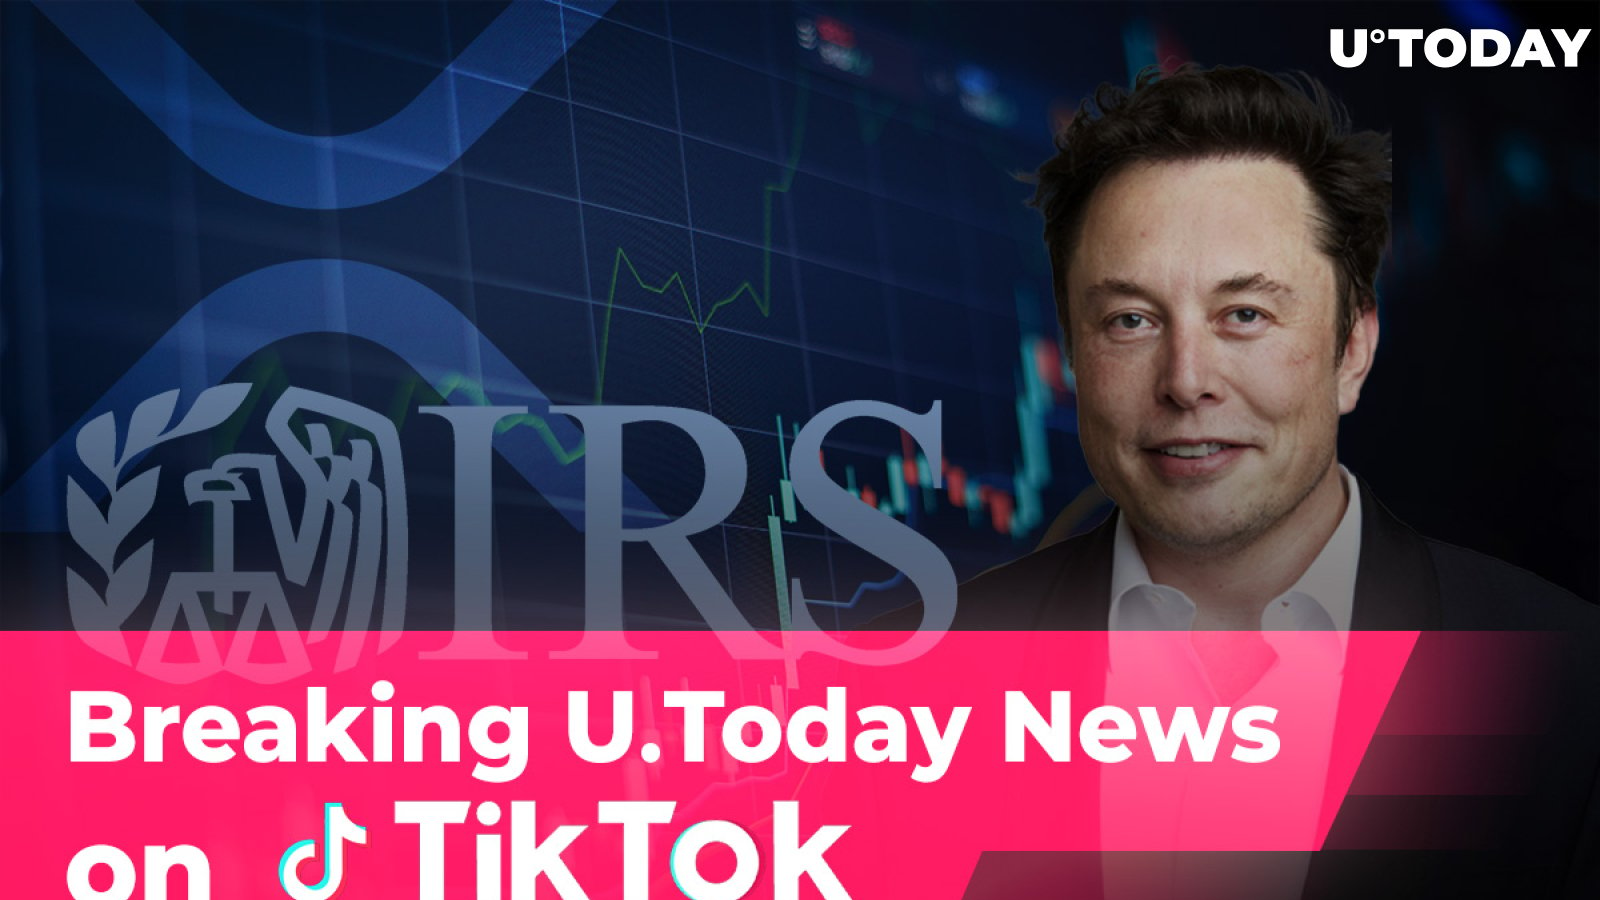 Elon Musk Sends BTC Below $46,000, Promotes XRP While IRS Plans Seizure of Debtors' Crypto: Day in Video With U.Today